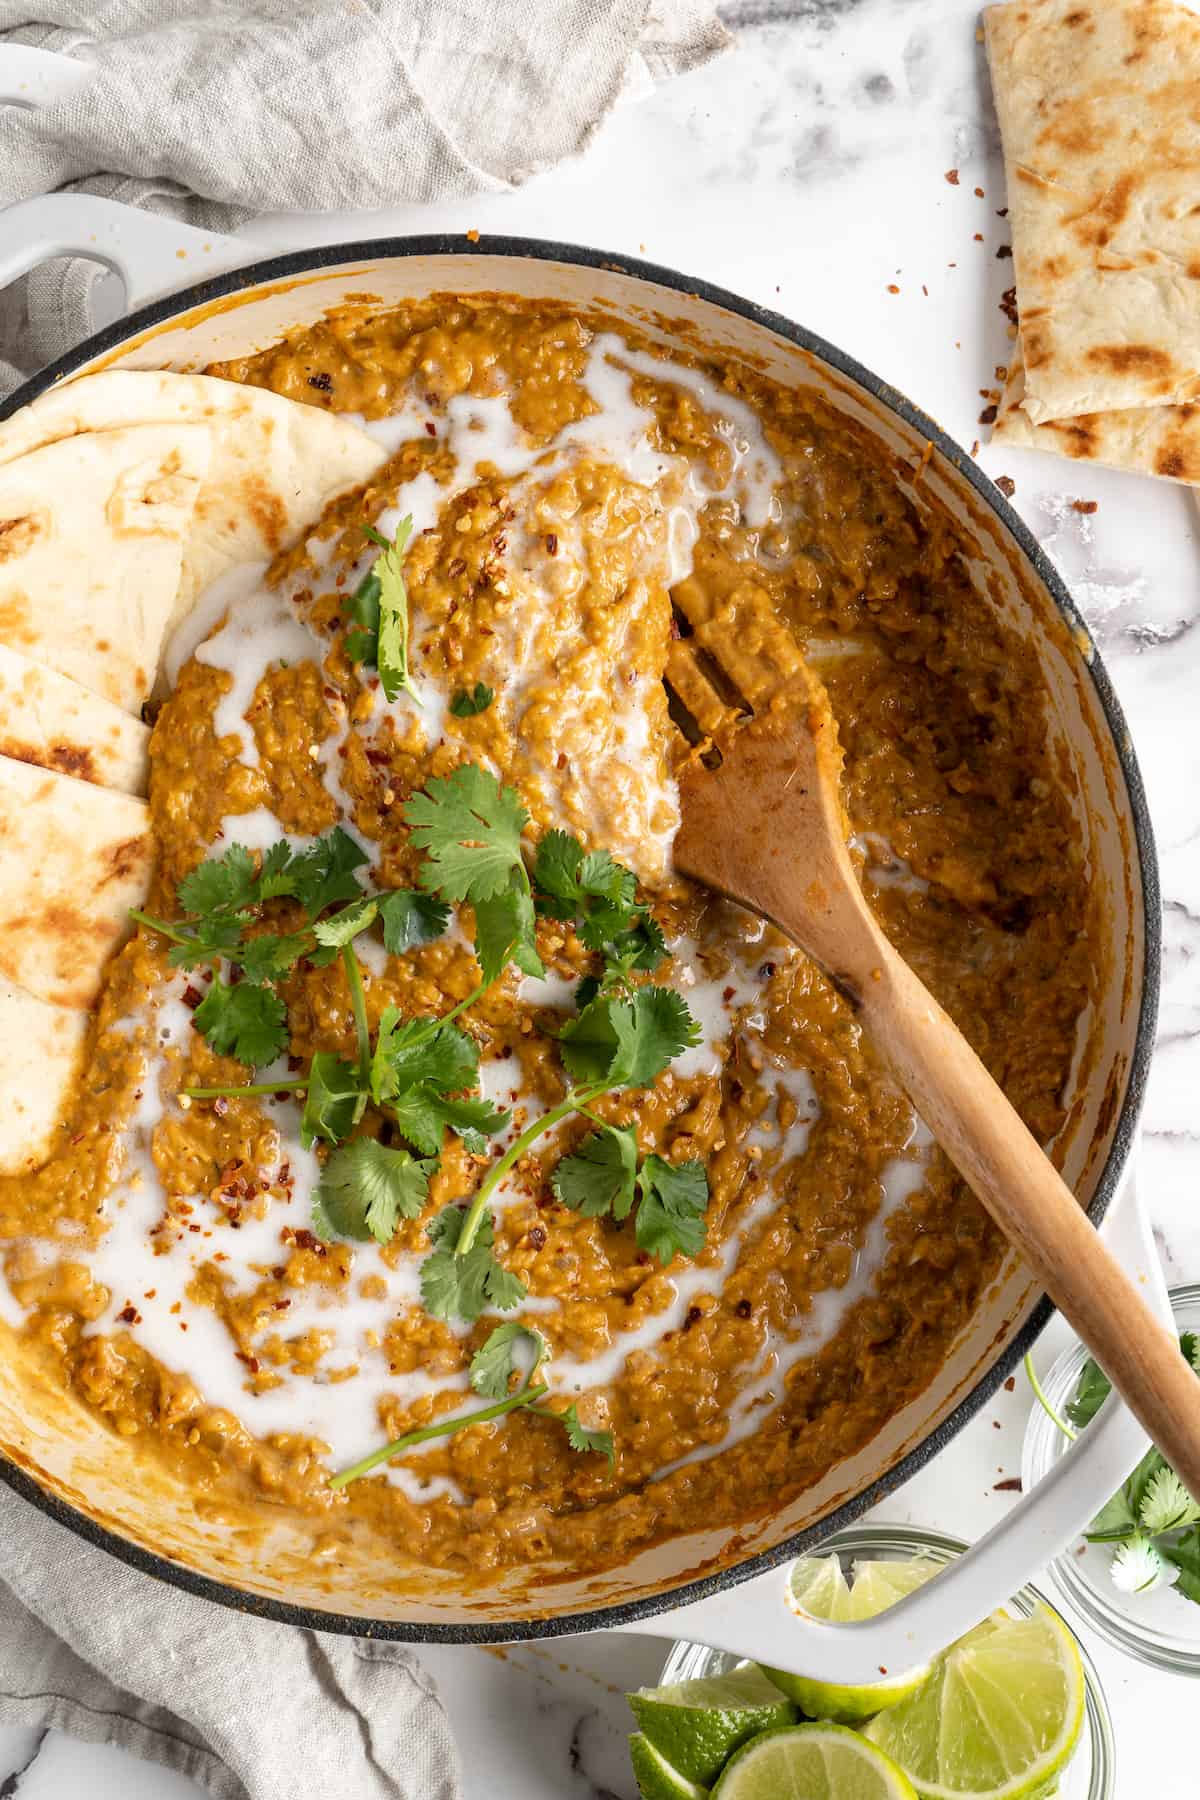 Overhead view of red lentil curry in pot with wooden spoon and naan